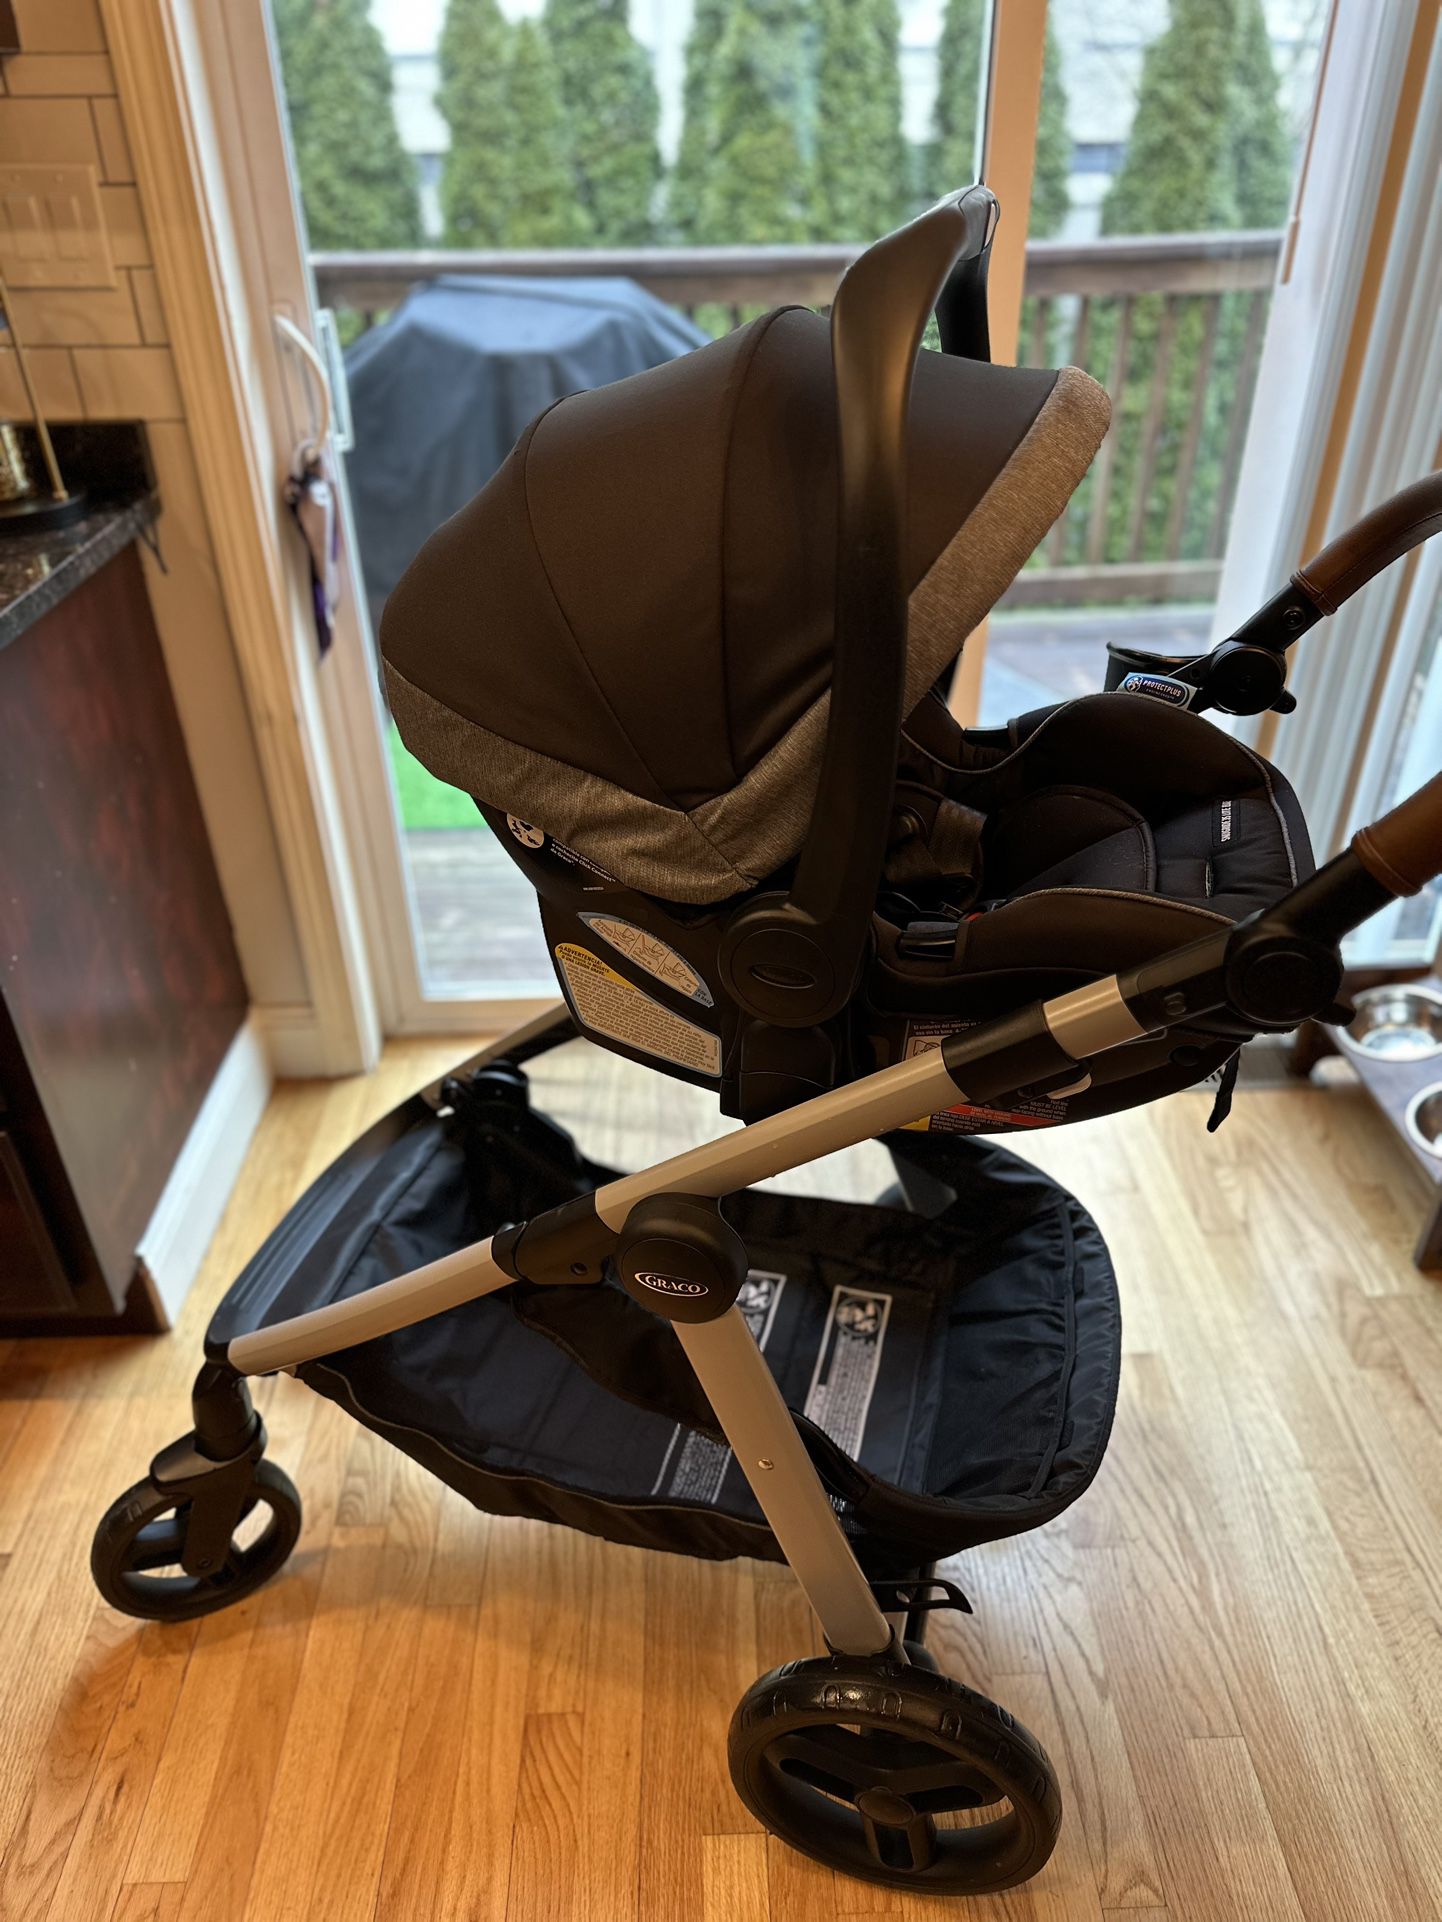 Graco Modes Nest2Grow Travel System 